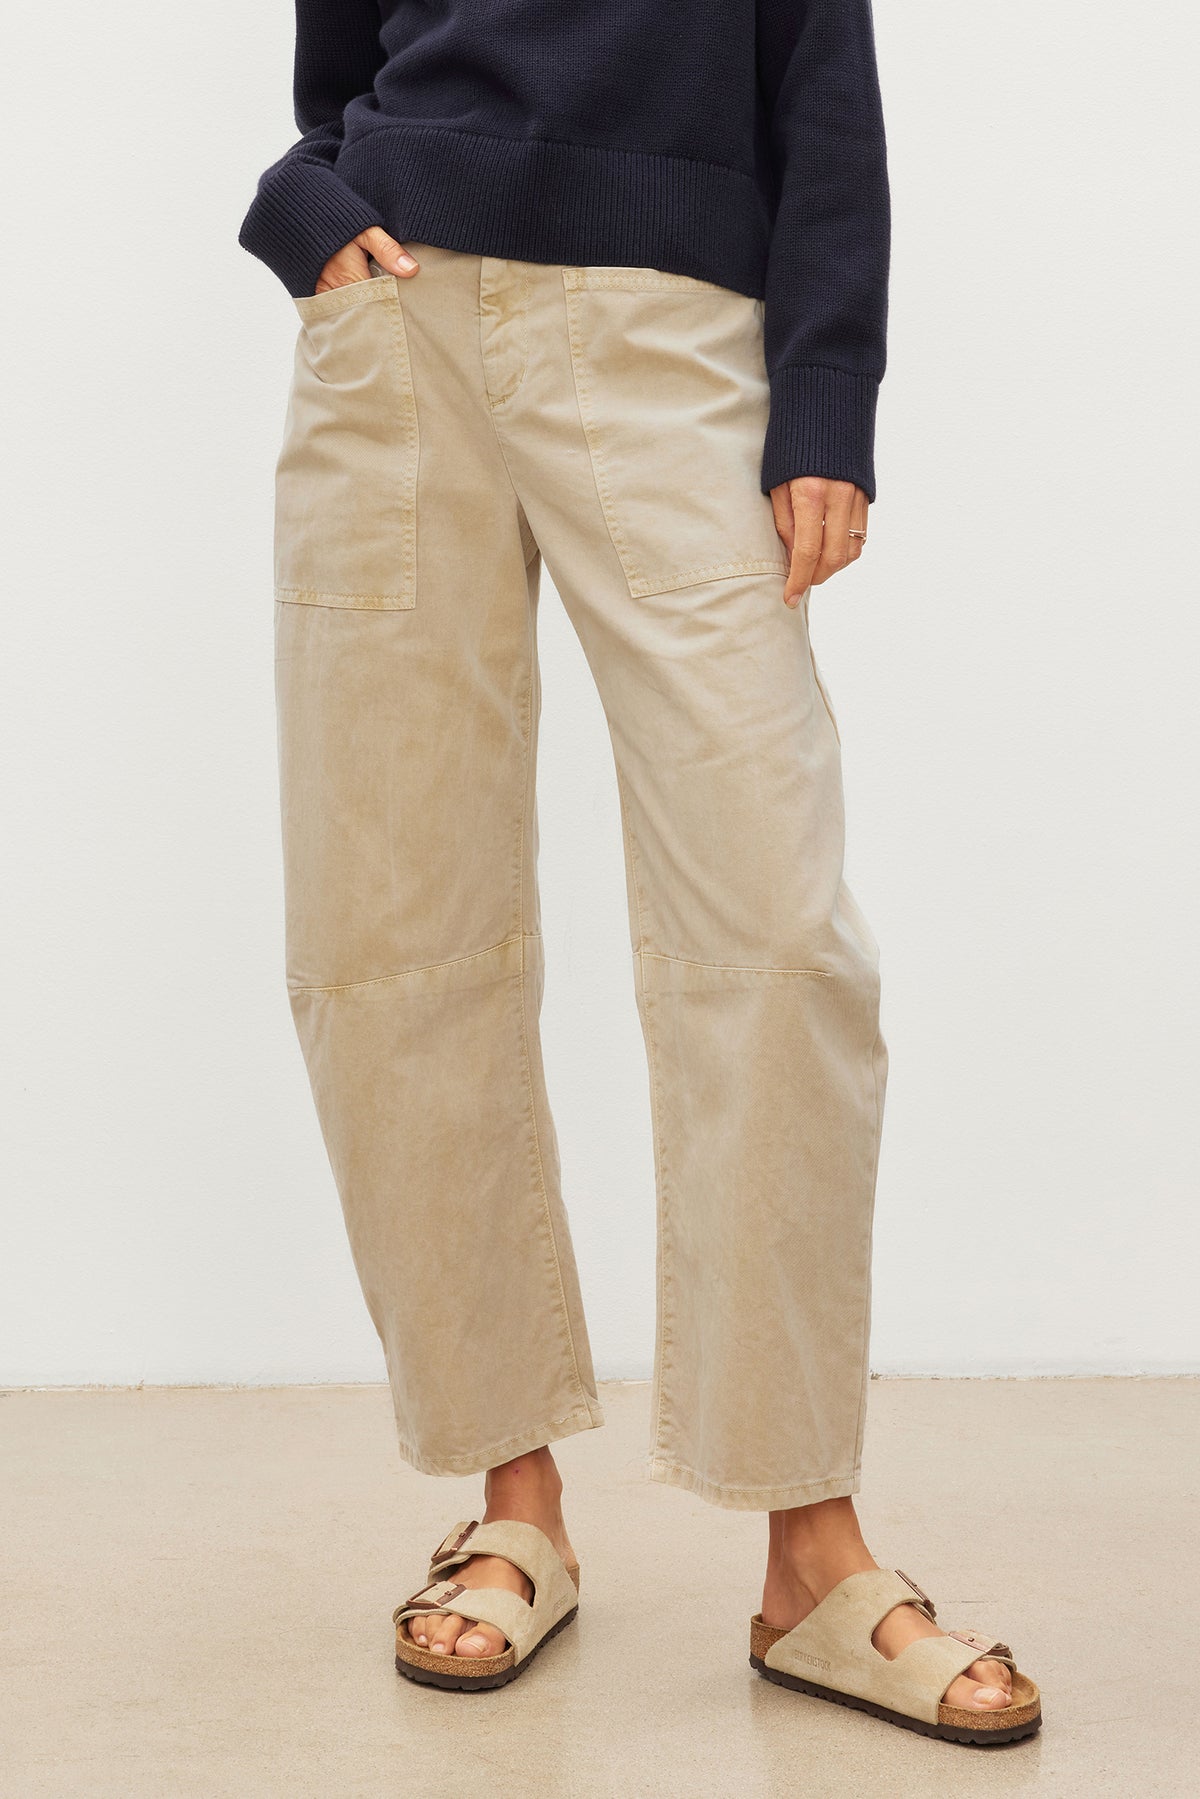 BRYLIE SANDED TWILL UTILITY PANT